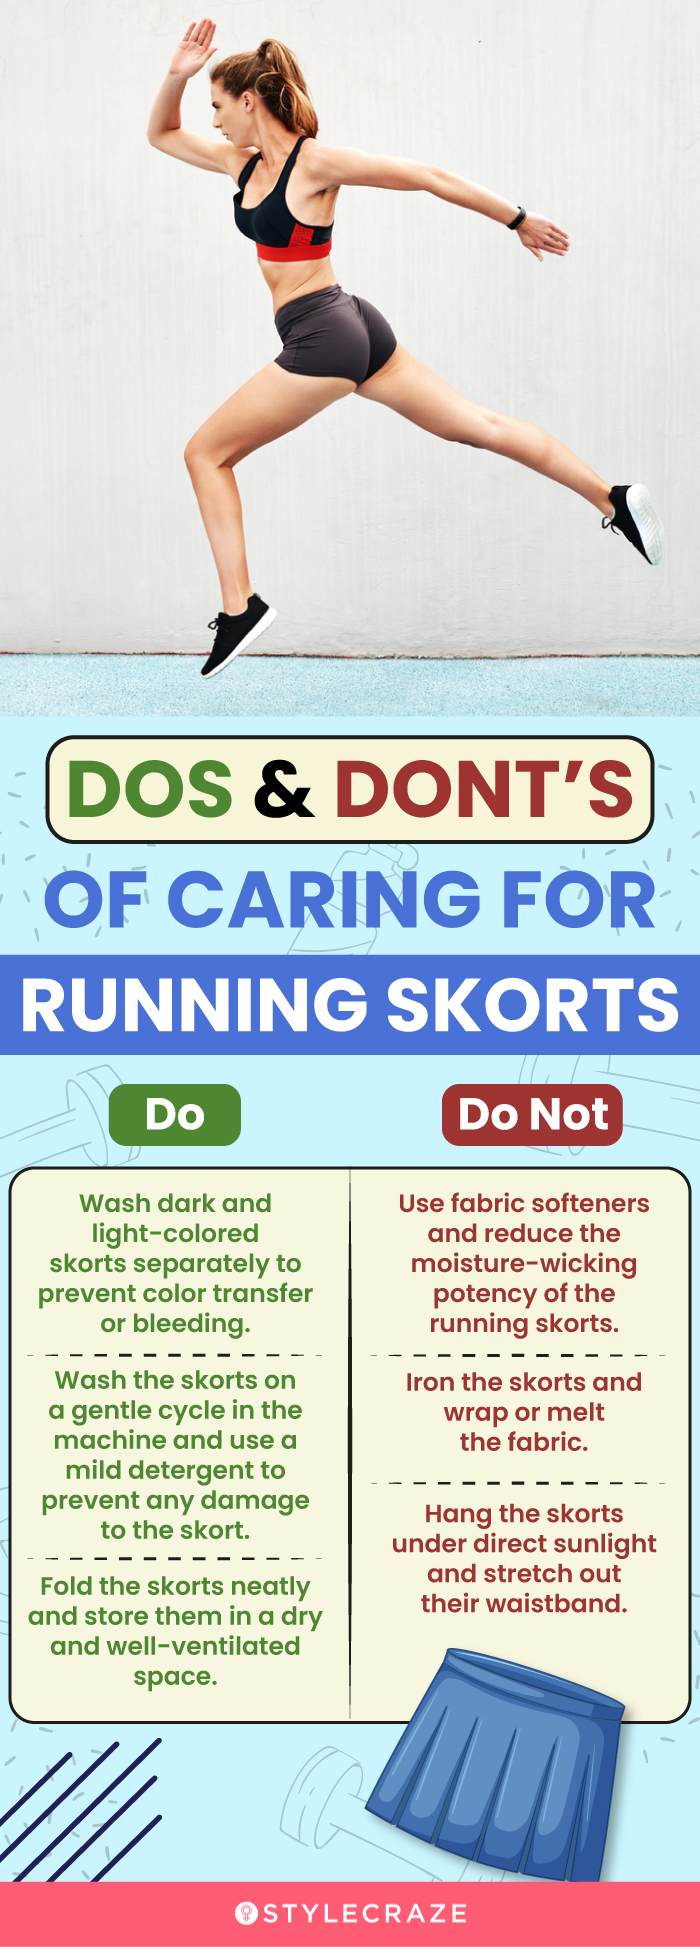 Dos & Donts To Care For Running Skorts (infographic)